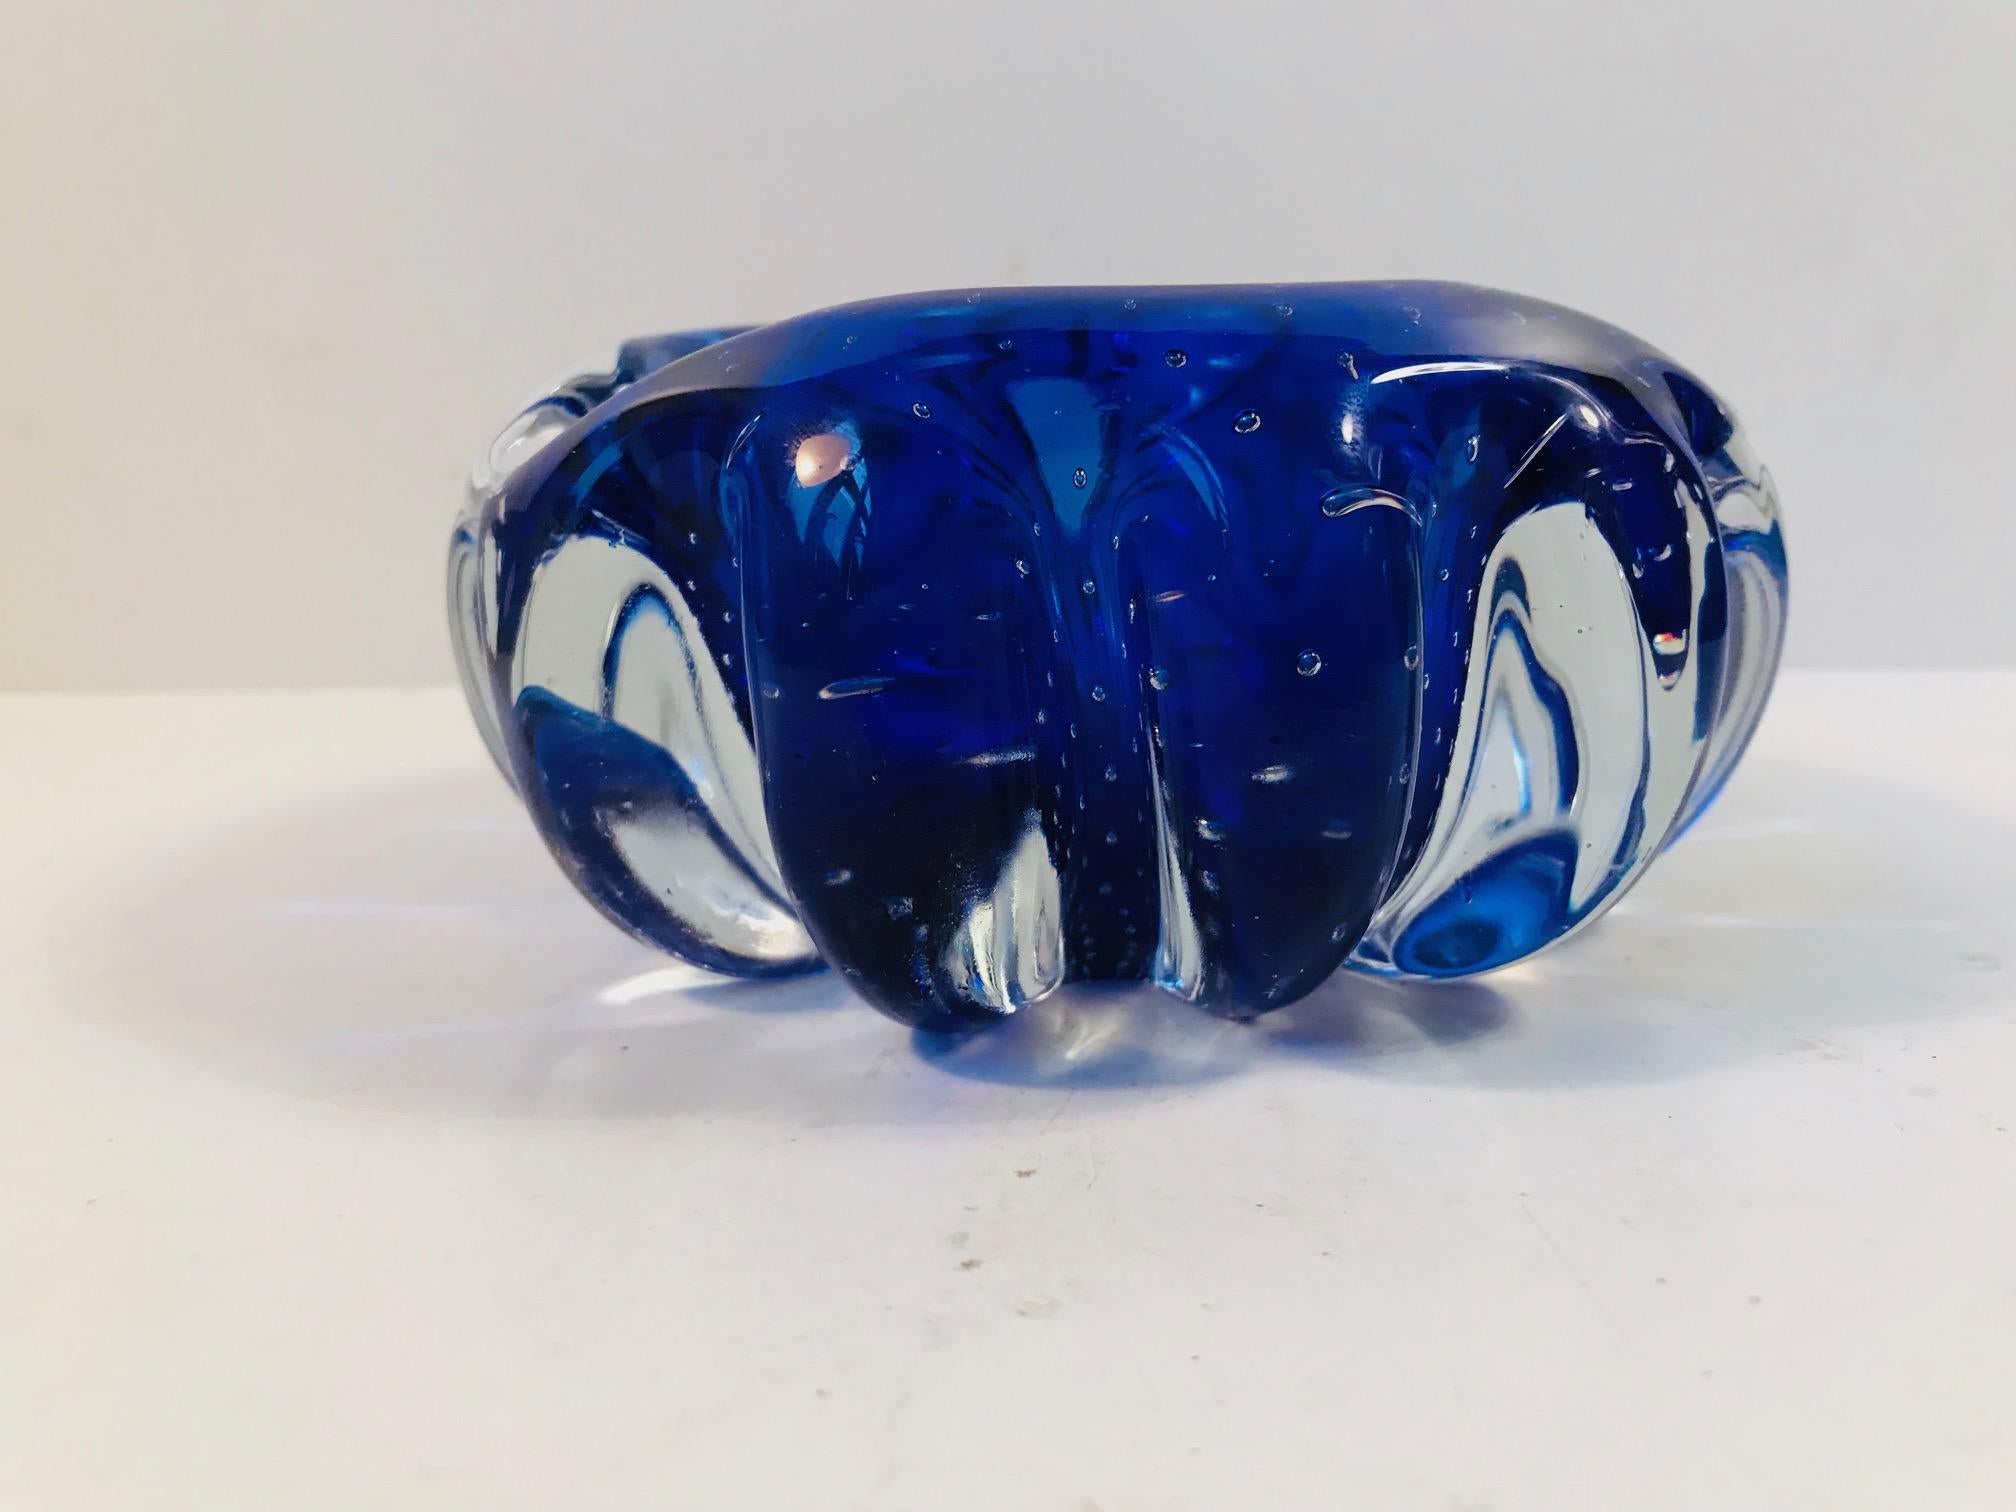 This blue Sommerso ashtray comes with controlled air-bubbles. It was made in Murano, Italy during the late 1950s or early 1960s.